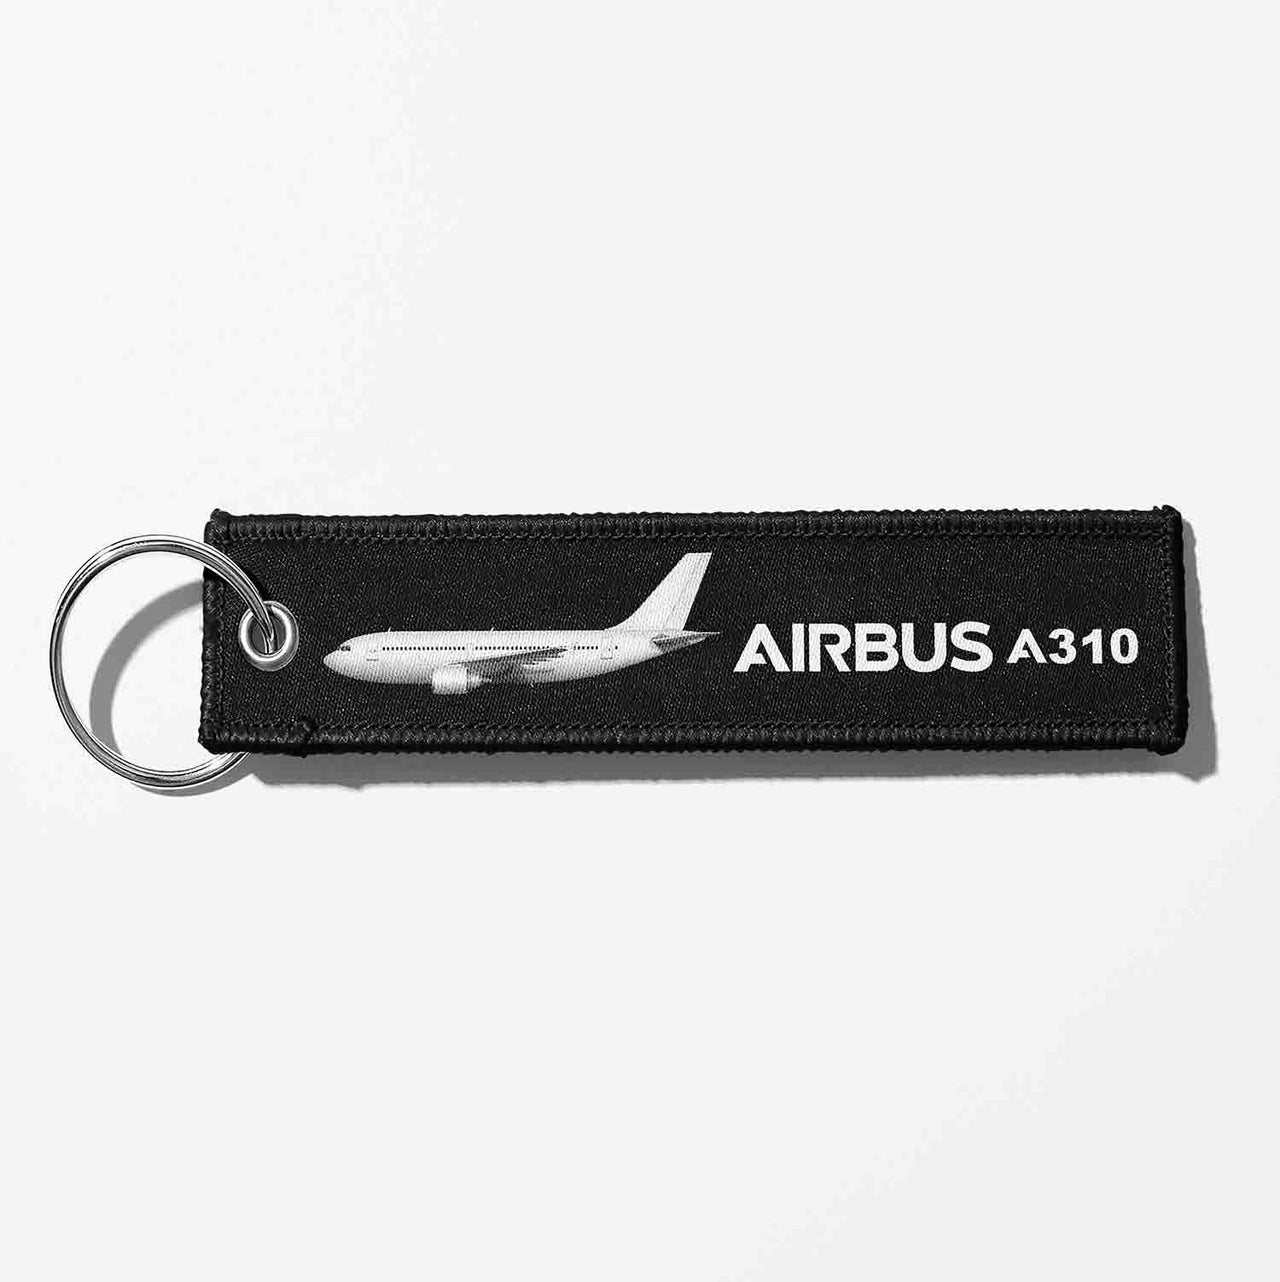 The Airbus A310 Designed Key Chains